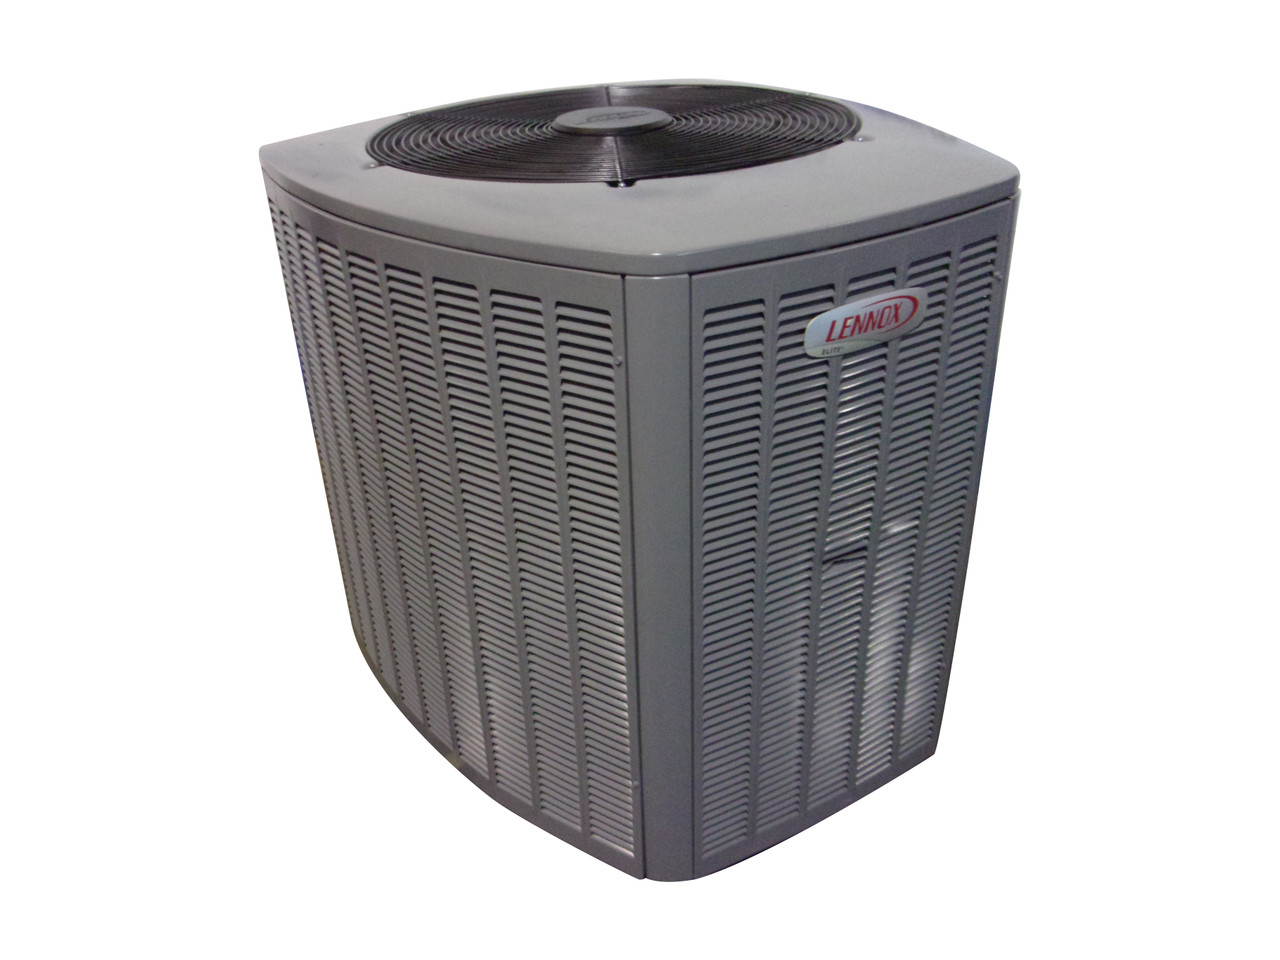 LENNOX Used Central Air Conditioner Condenser XP14